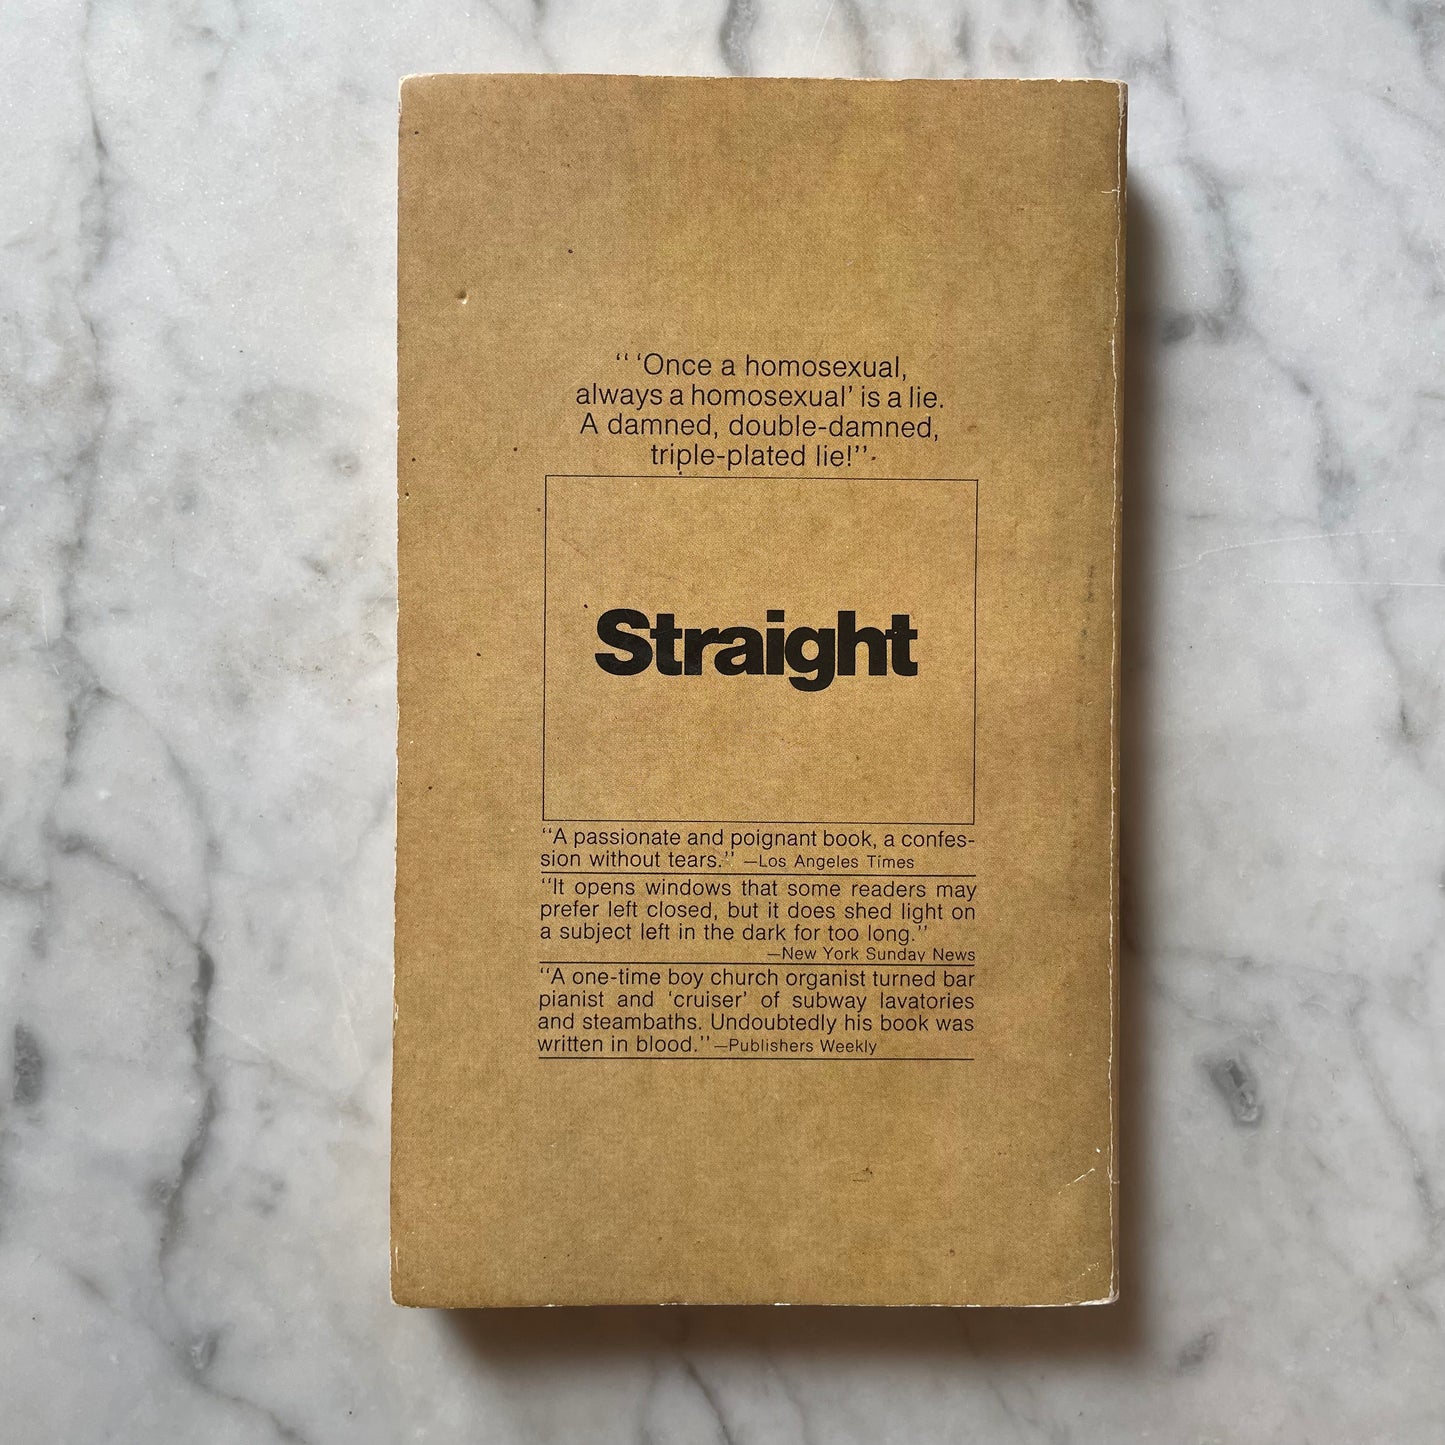 Straight by William Aaron, 1973